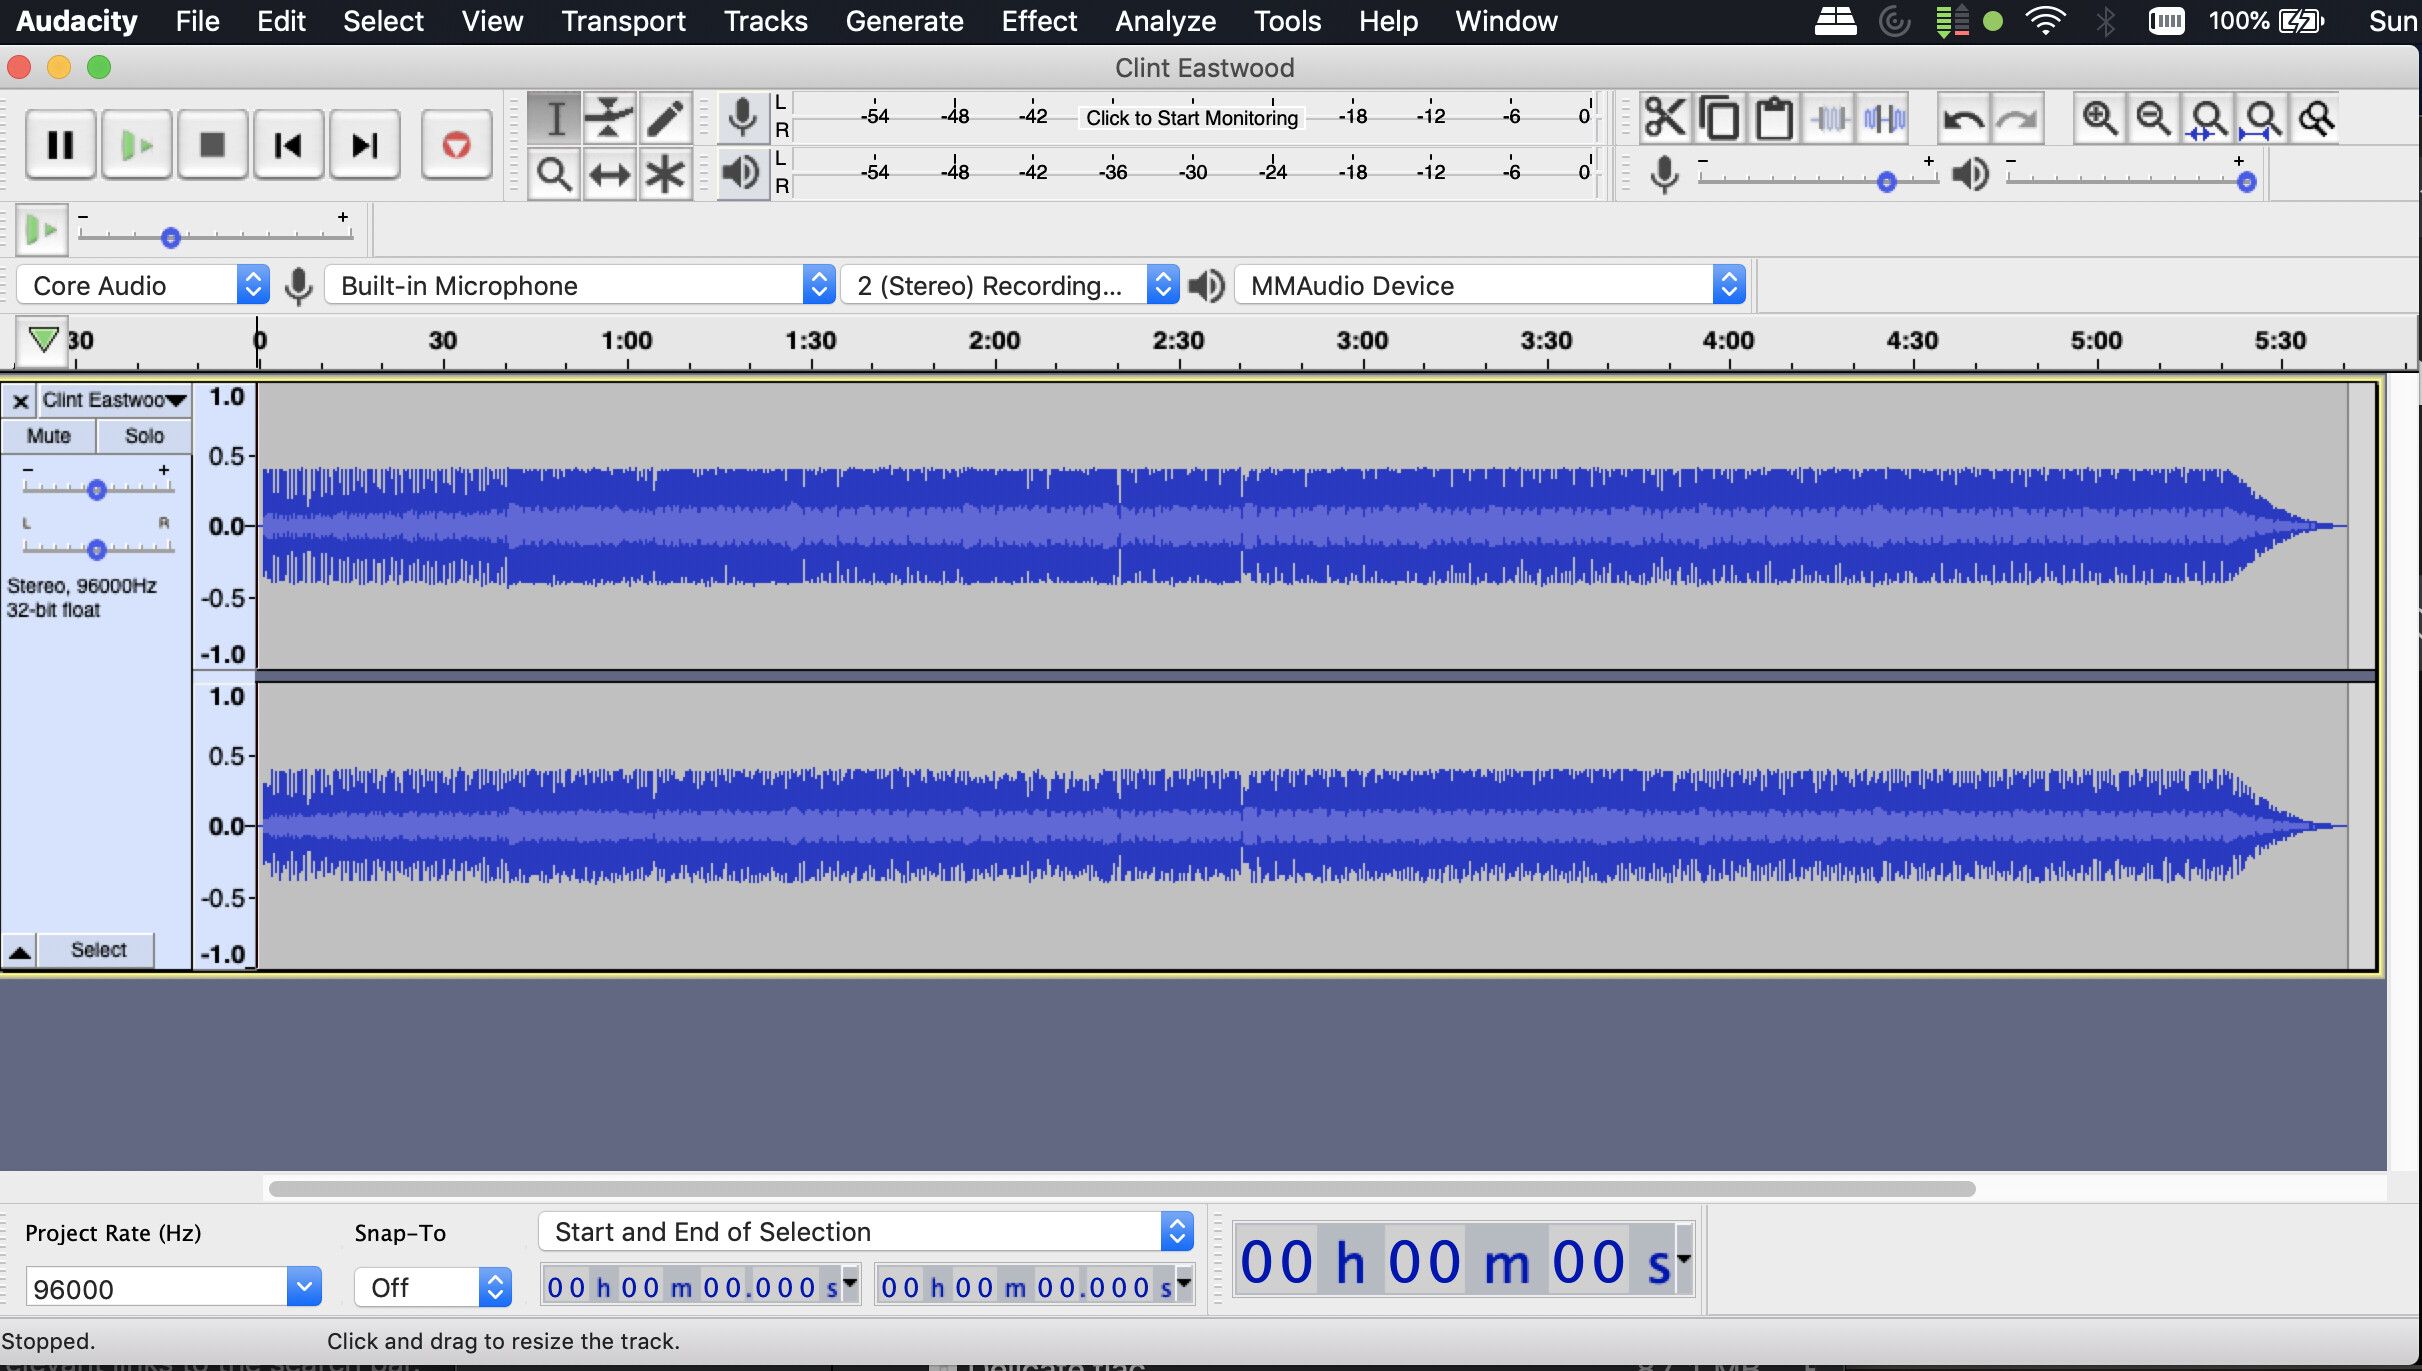 How To Record System Audio on Mac Using Audacity - [Step-by-Step]